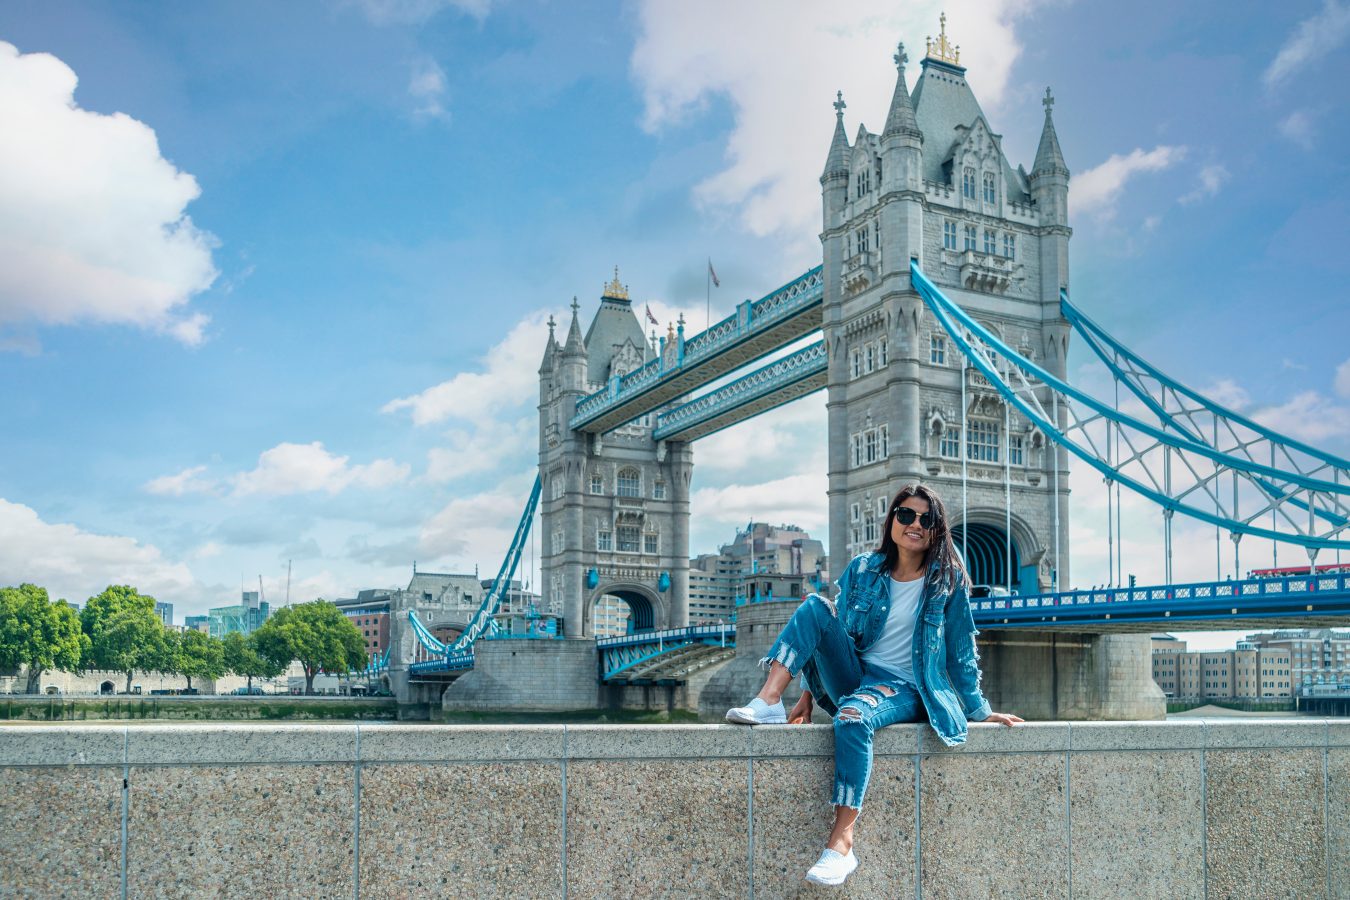 Student on a city trip in London by the river Thames in London, with Tower Bridge in background